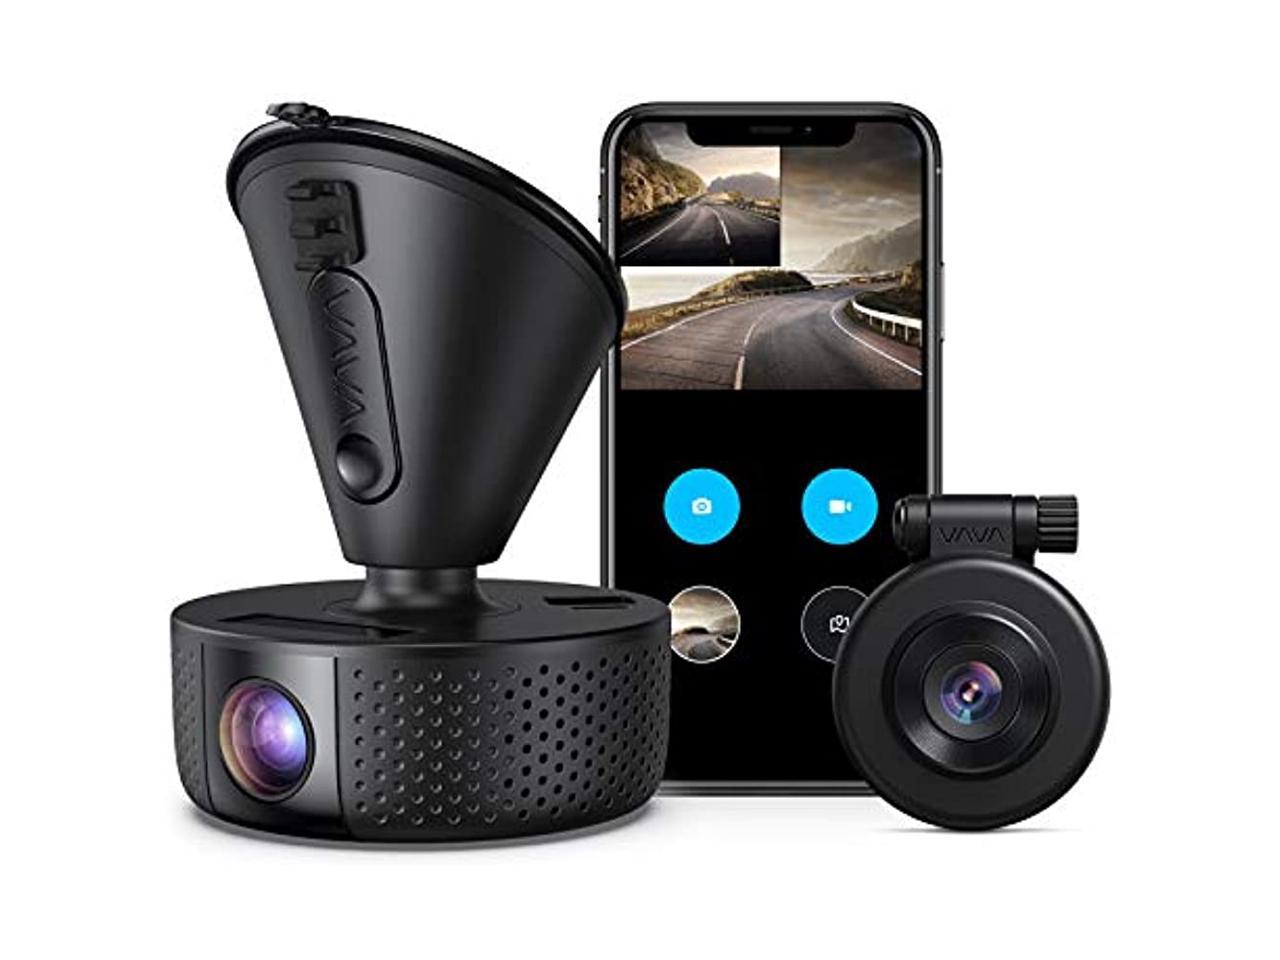 VAVA VD002 Dual 1920x1080P FHD Dash Cam, 2560x1440P Single Front, 30fps - 60fps Clear HD Videos, Night Vision, 24hr Parking Mode, Built-In WiFi, G-Sensor, Loop Recording, Supports 128GB Max